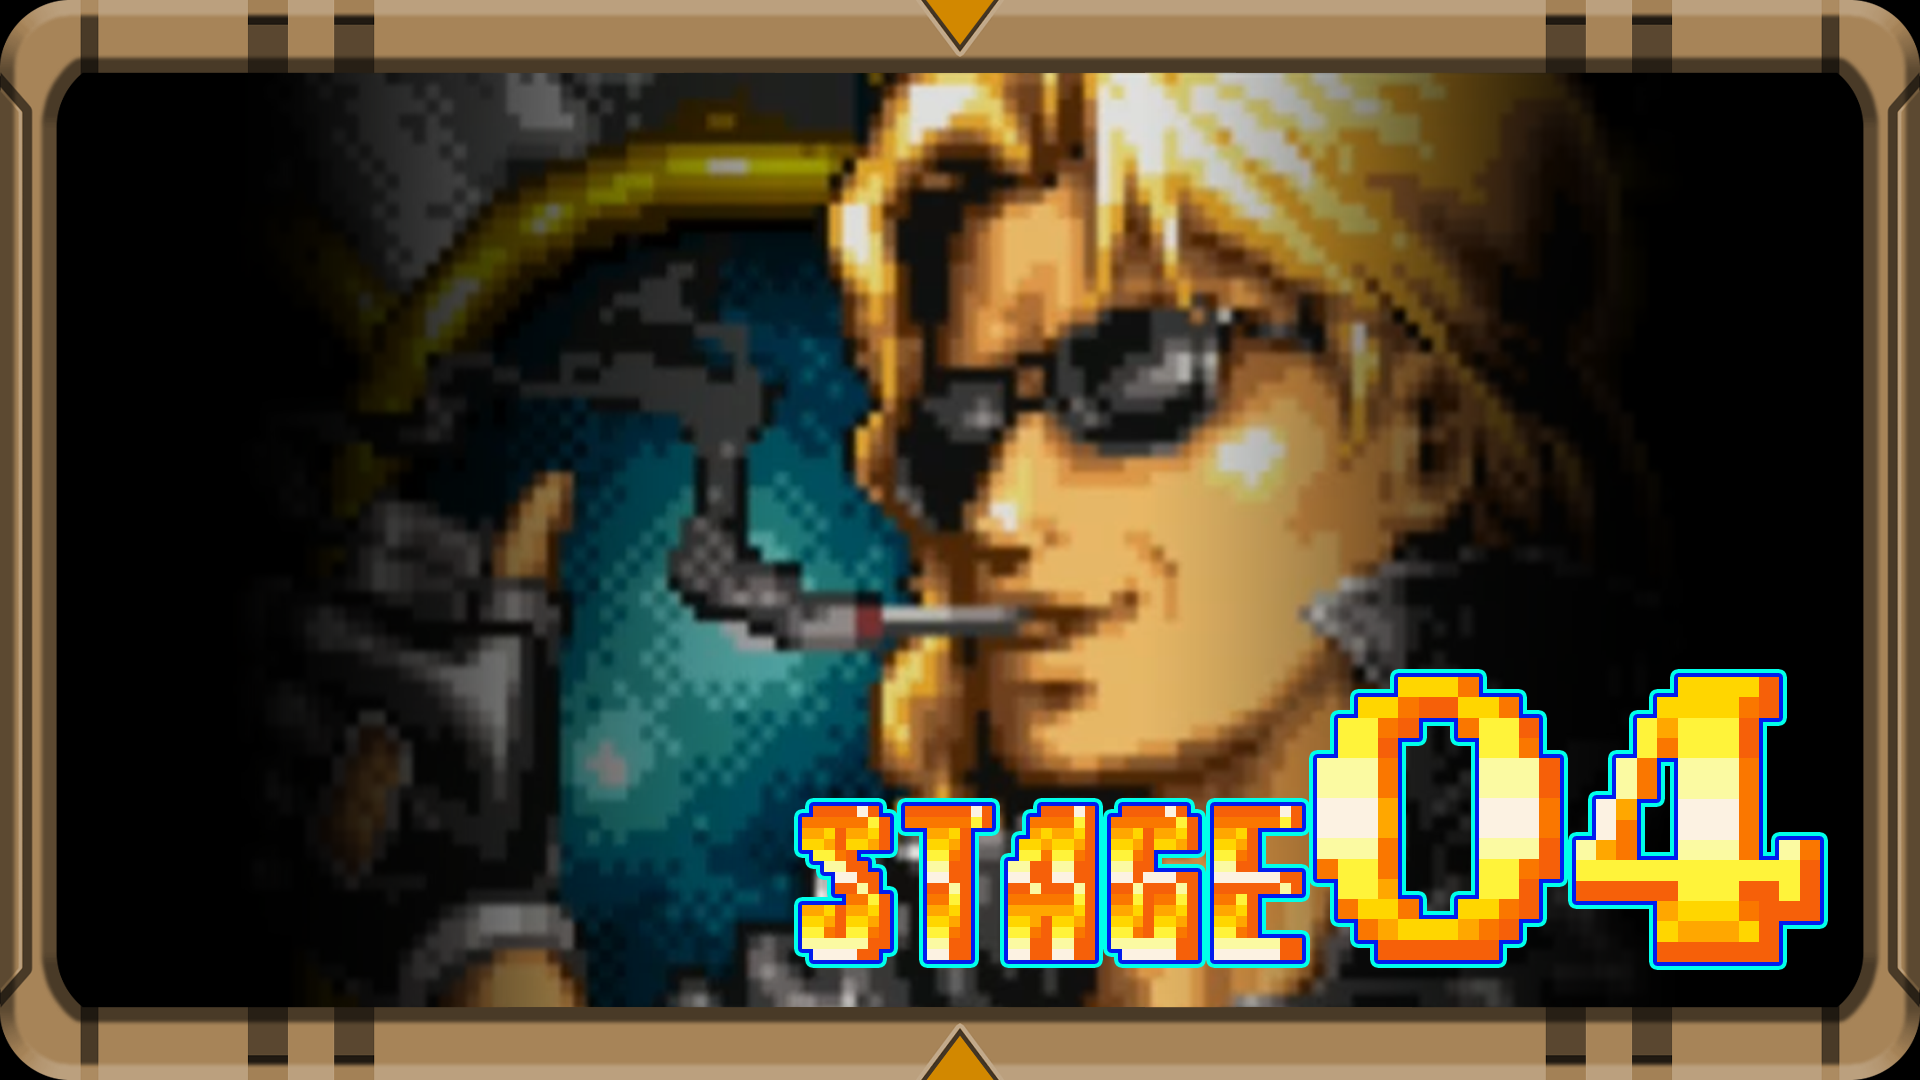 Icon for Stage 4 completed